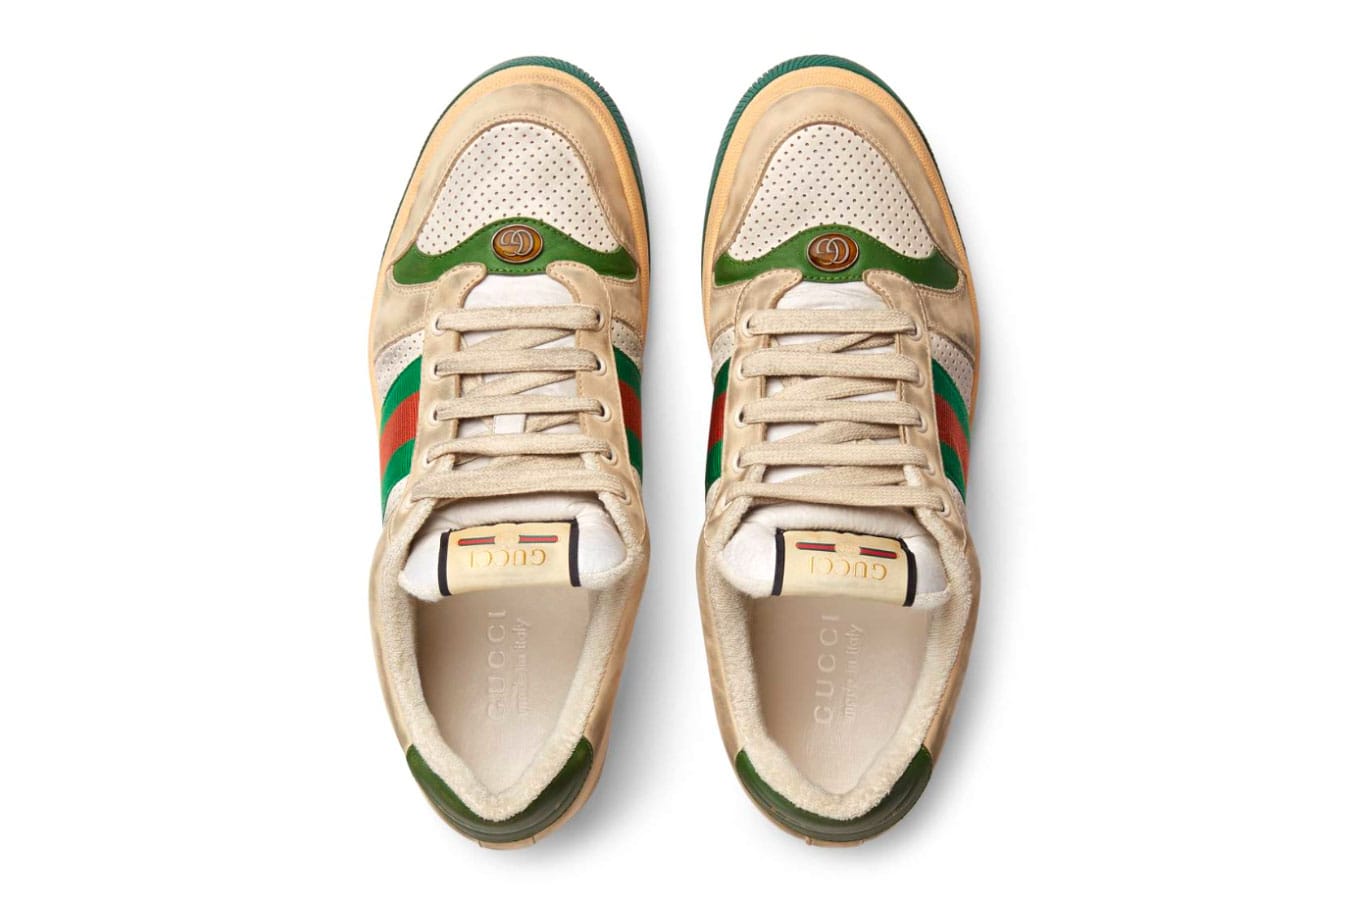 Vintage Gucci Men's Sneakers Selected by Anna Corinna | Free People